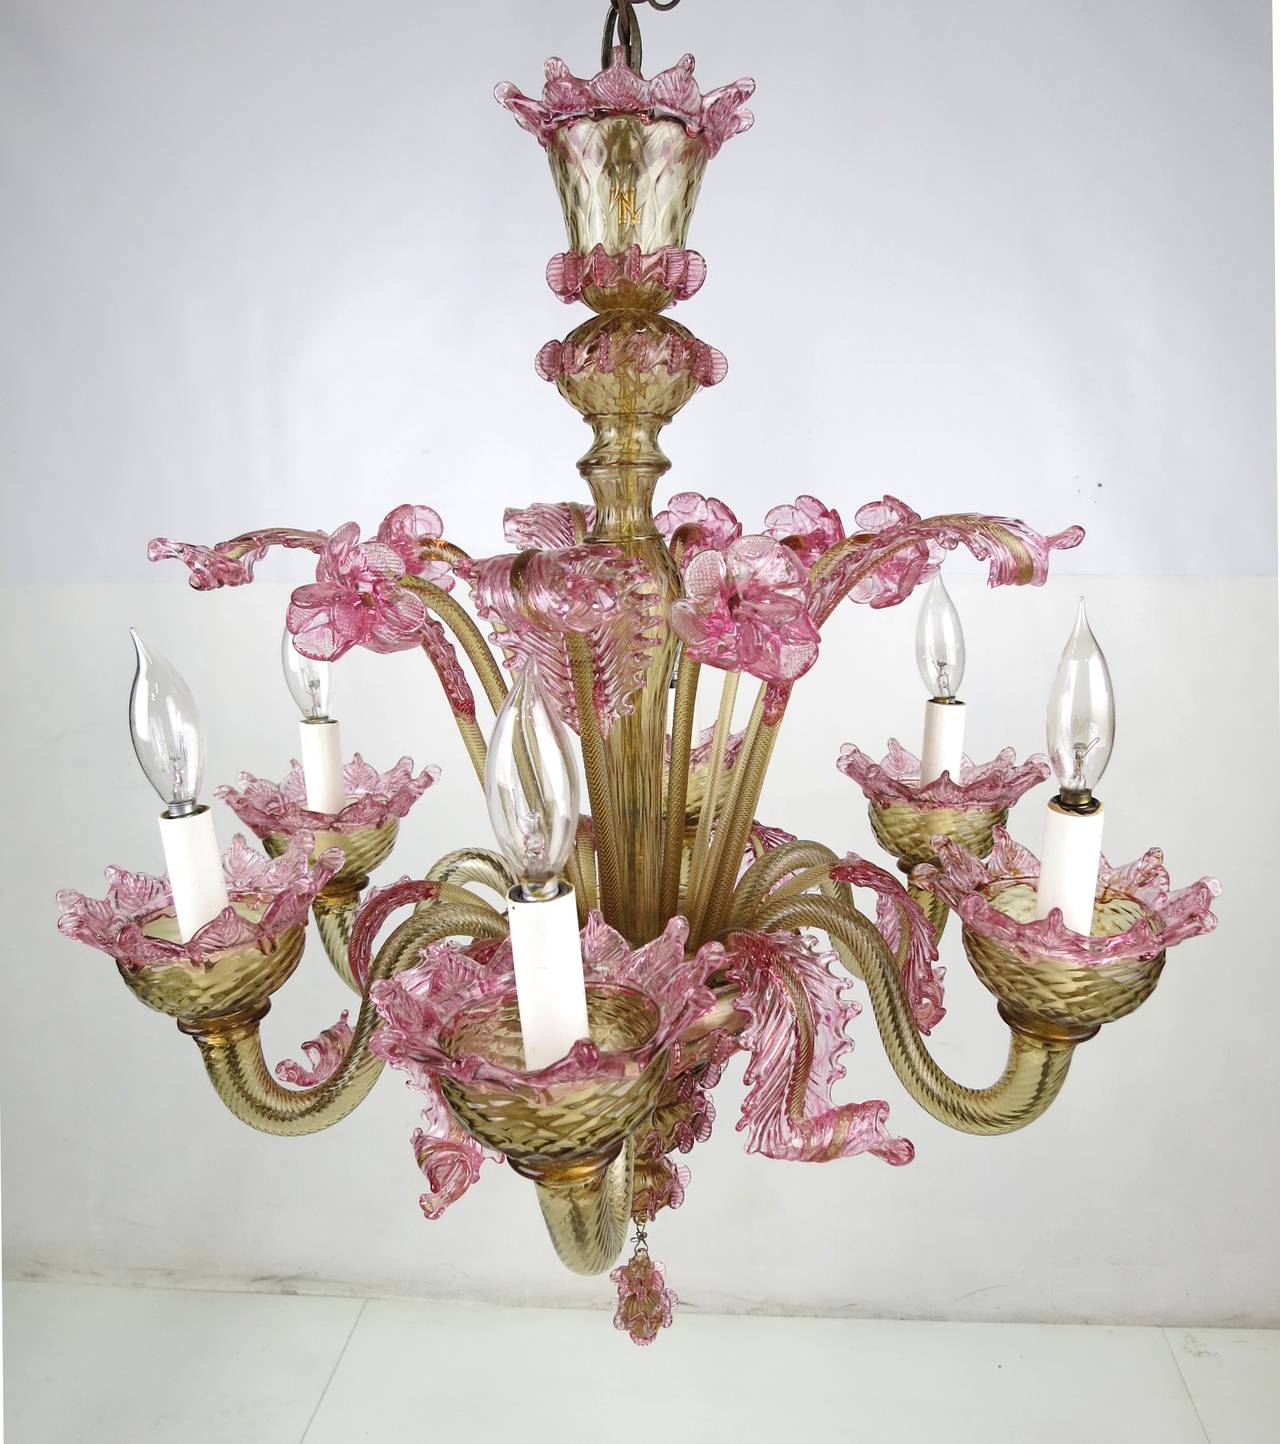 Beautiful vintage Murano six-arm chandelier with plumes and flowers in amber and pink glass, suspended with a cast bronze bulb form chain. The chandelier is in perfect condition with no breaks, losses, or repairs.